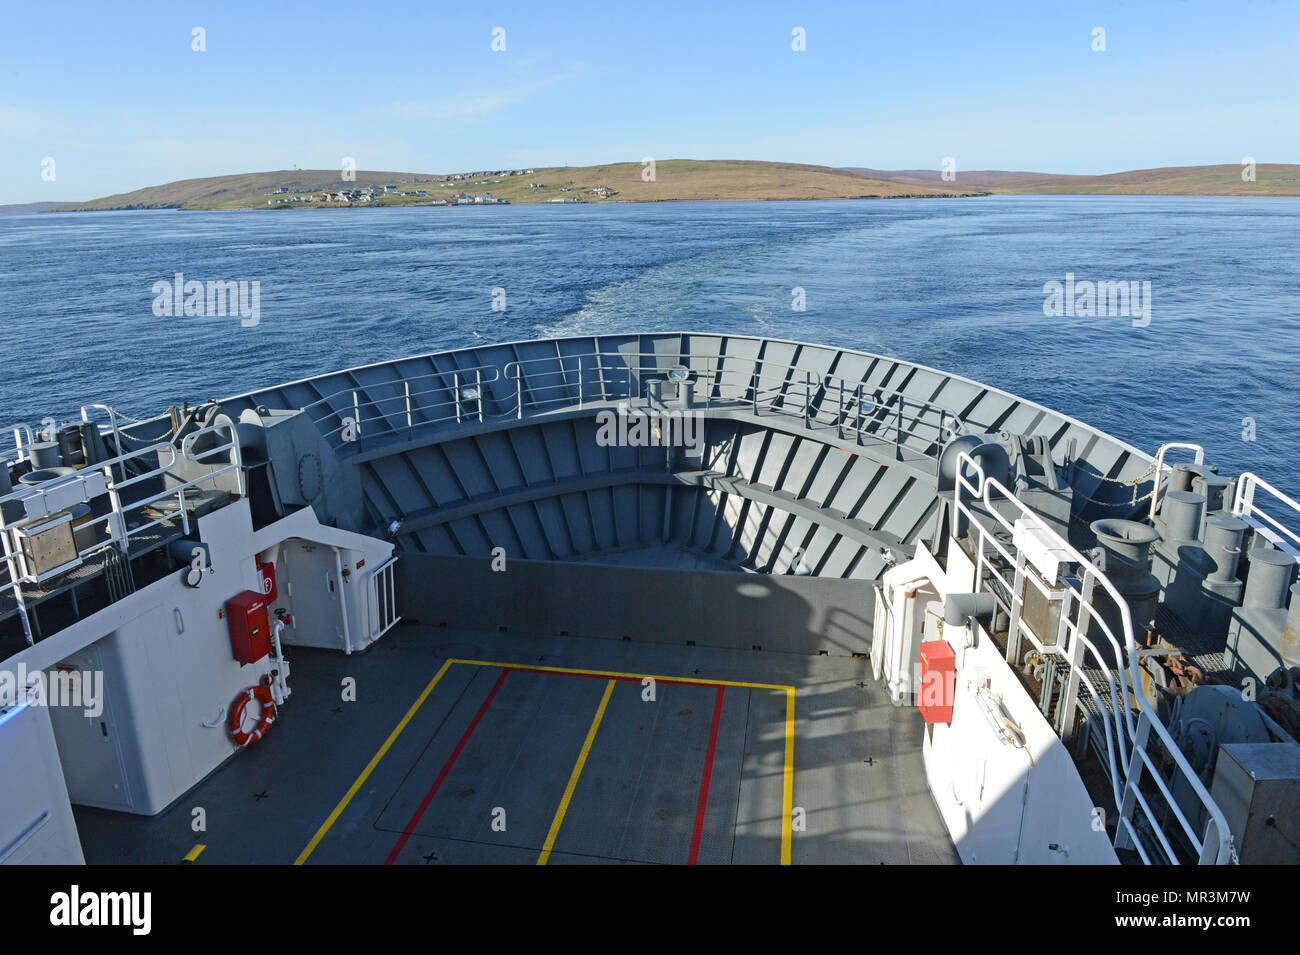 The Yell ferry that connects the mainland of Shetland to the island of Yell. Dropping off passengers and cars to the ferry terminal Stock Photo